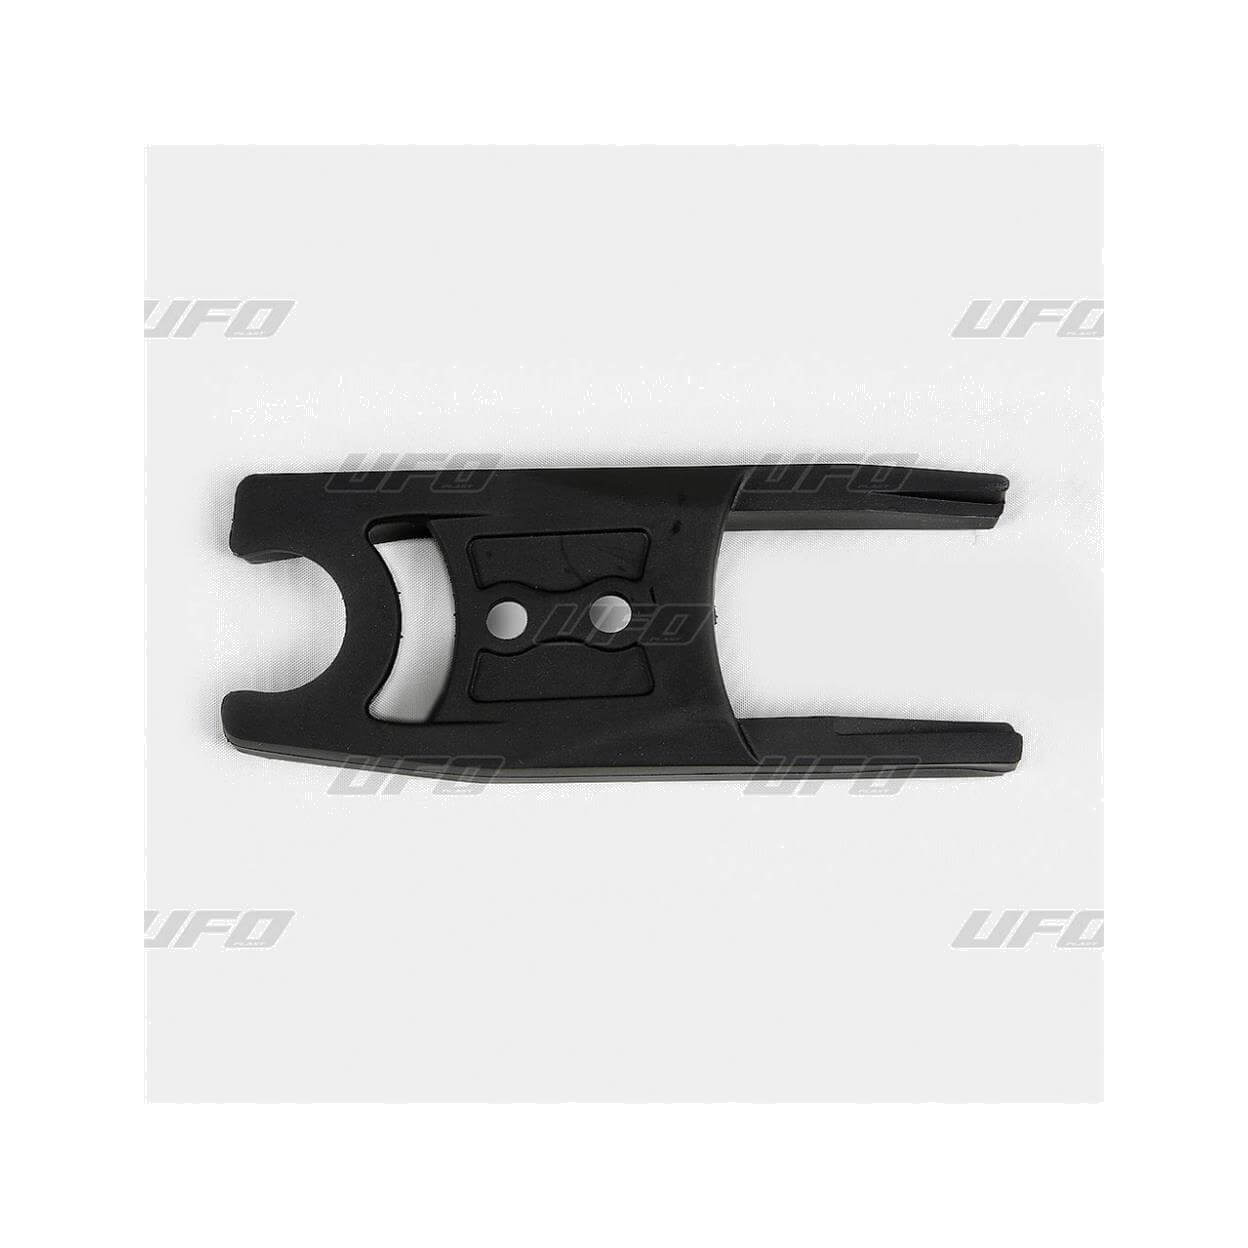 UFO SWING SKATE compatible with compatible with YAMAHA YZ 65 65 2017-2022 - Picture 1 of 1